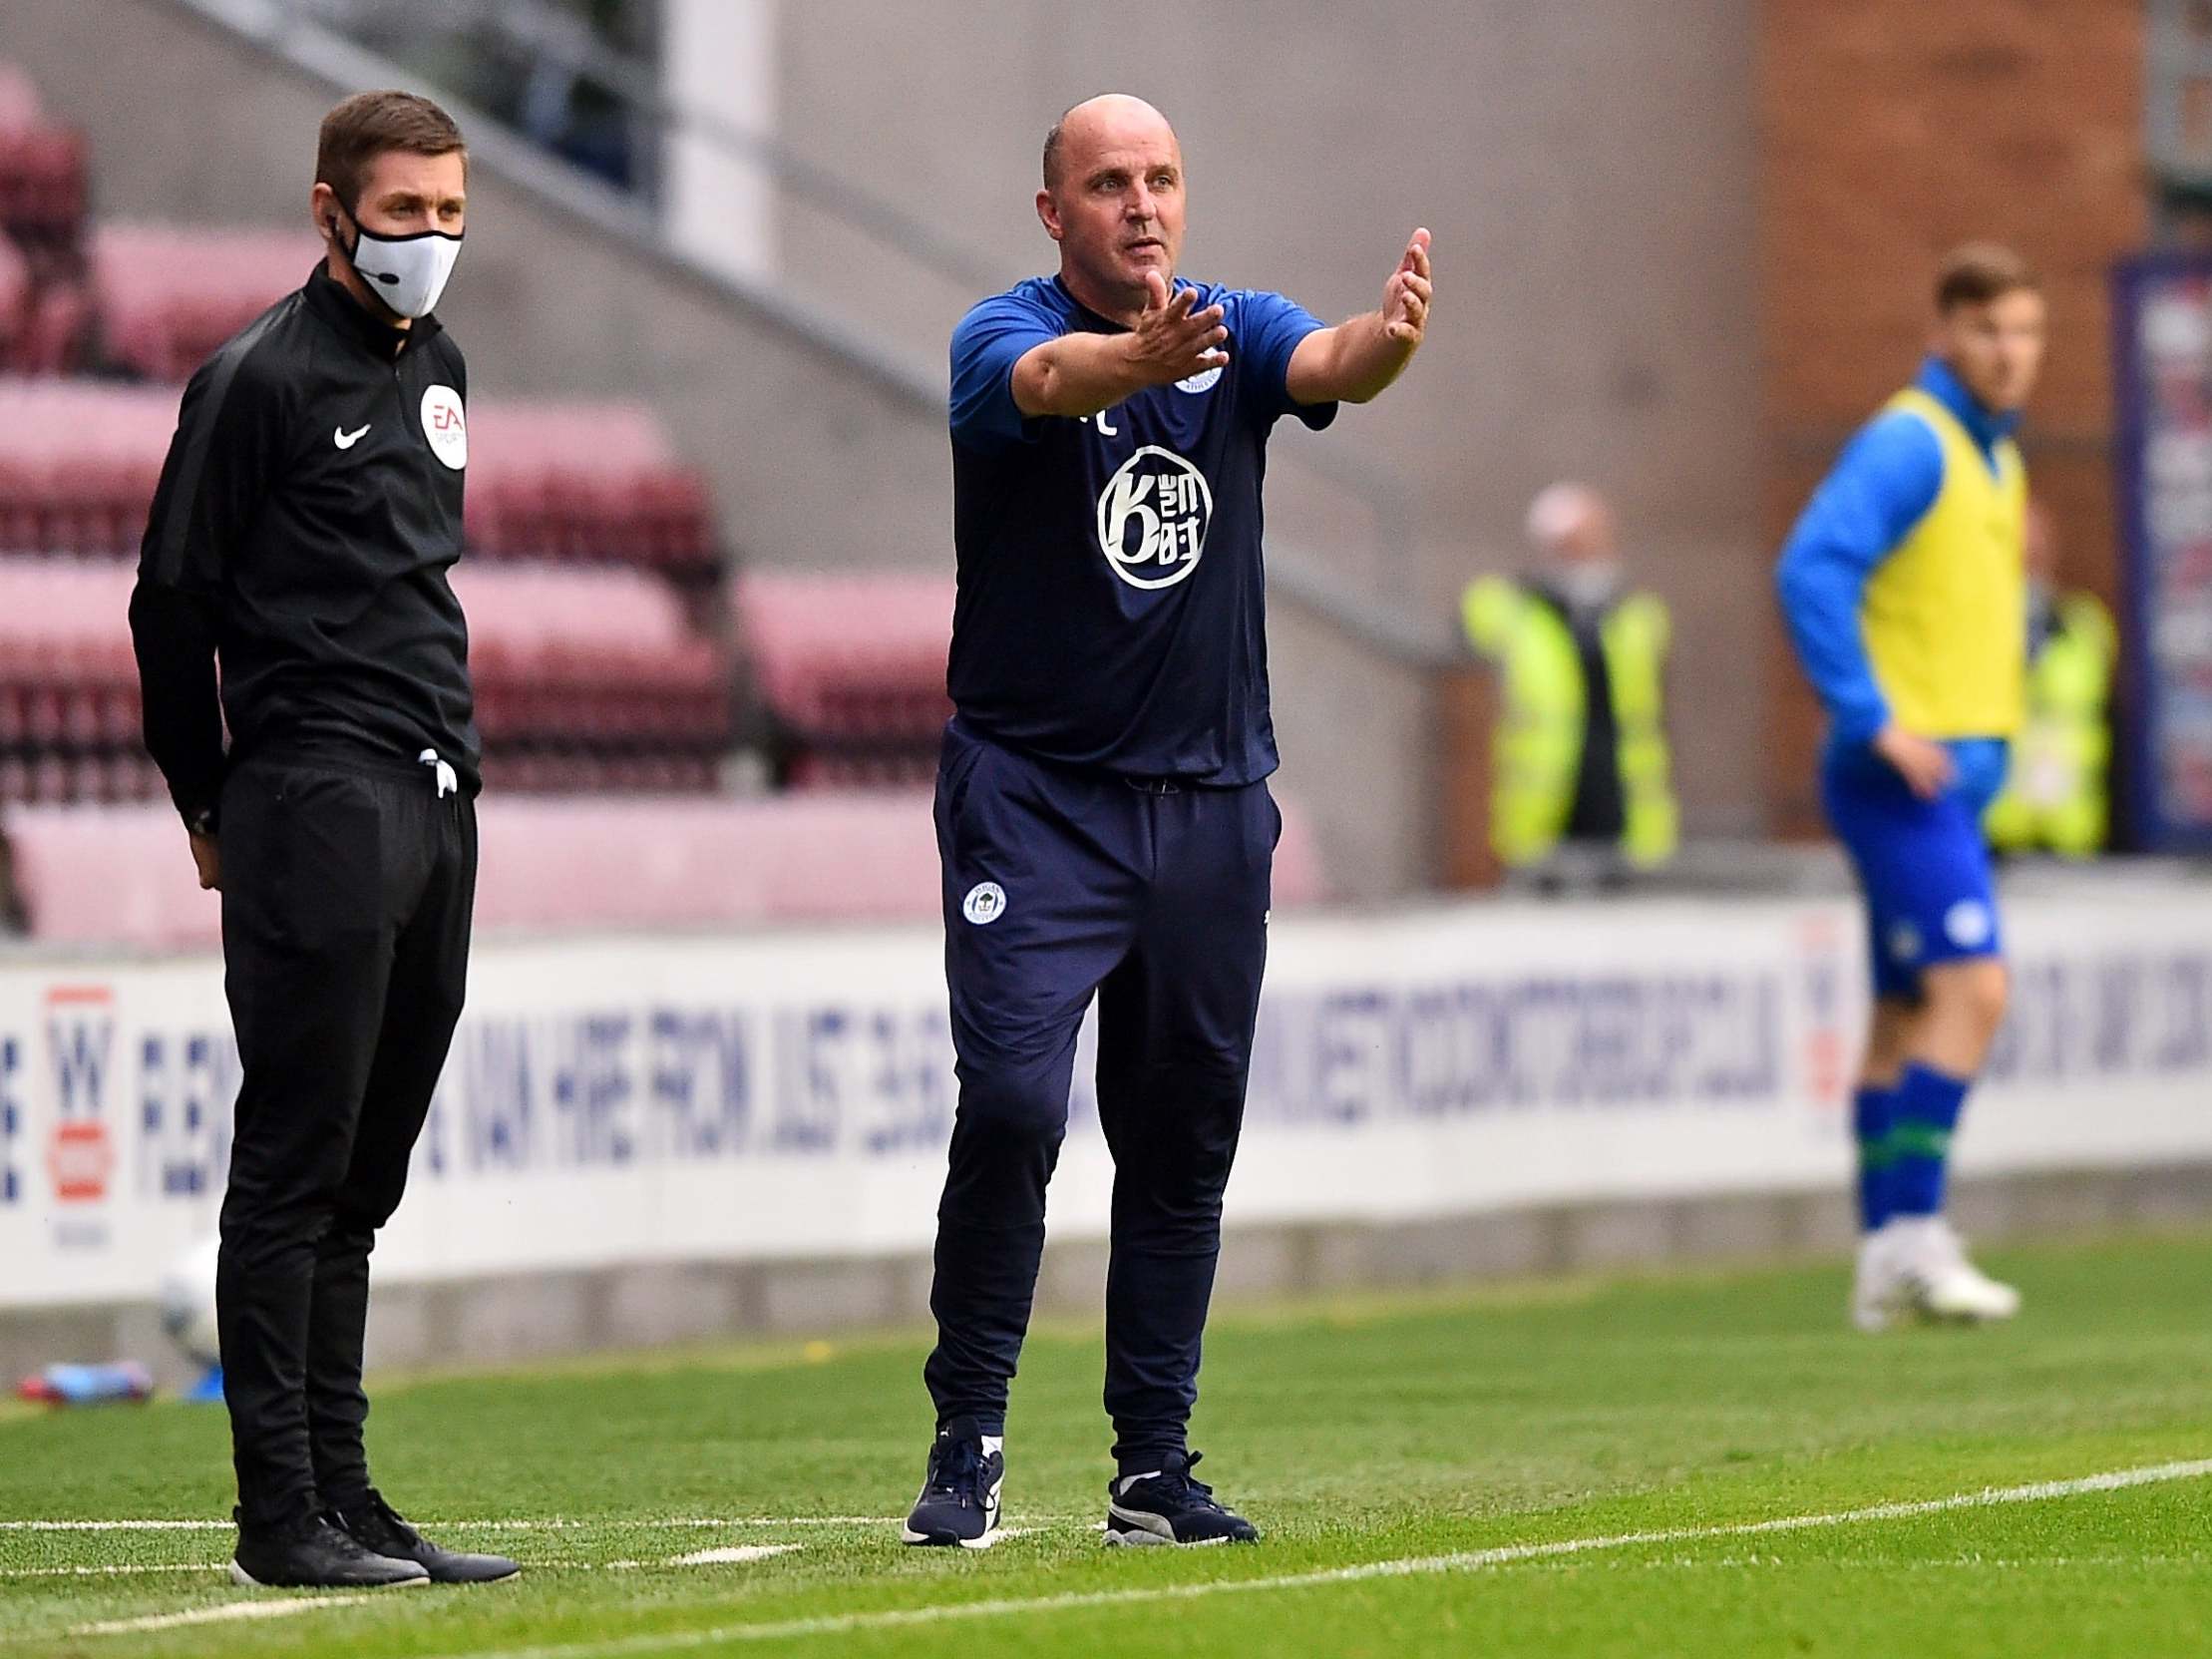 Wigan manager Paul Cook gestures during the draw with Fulham that could relegate the club to League One